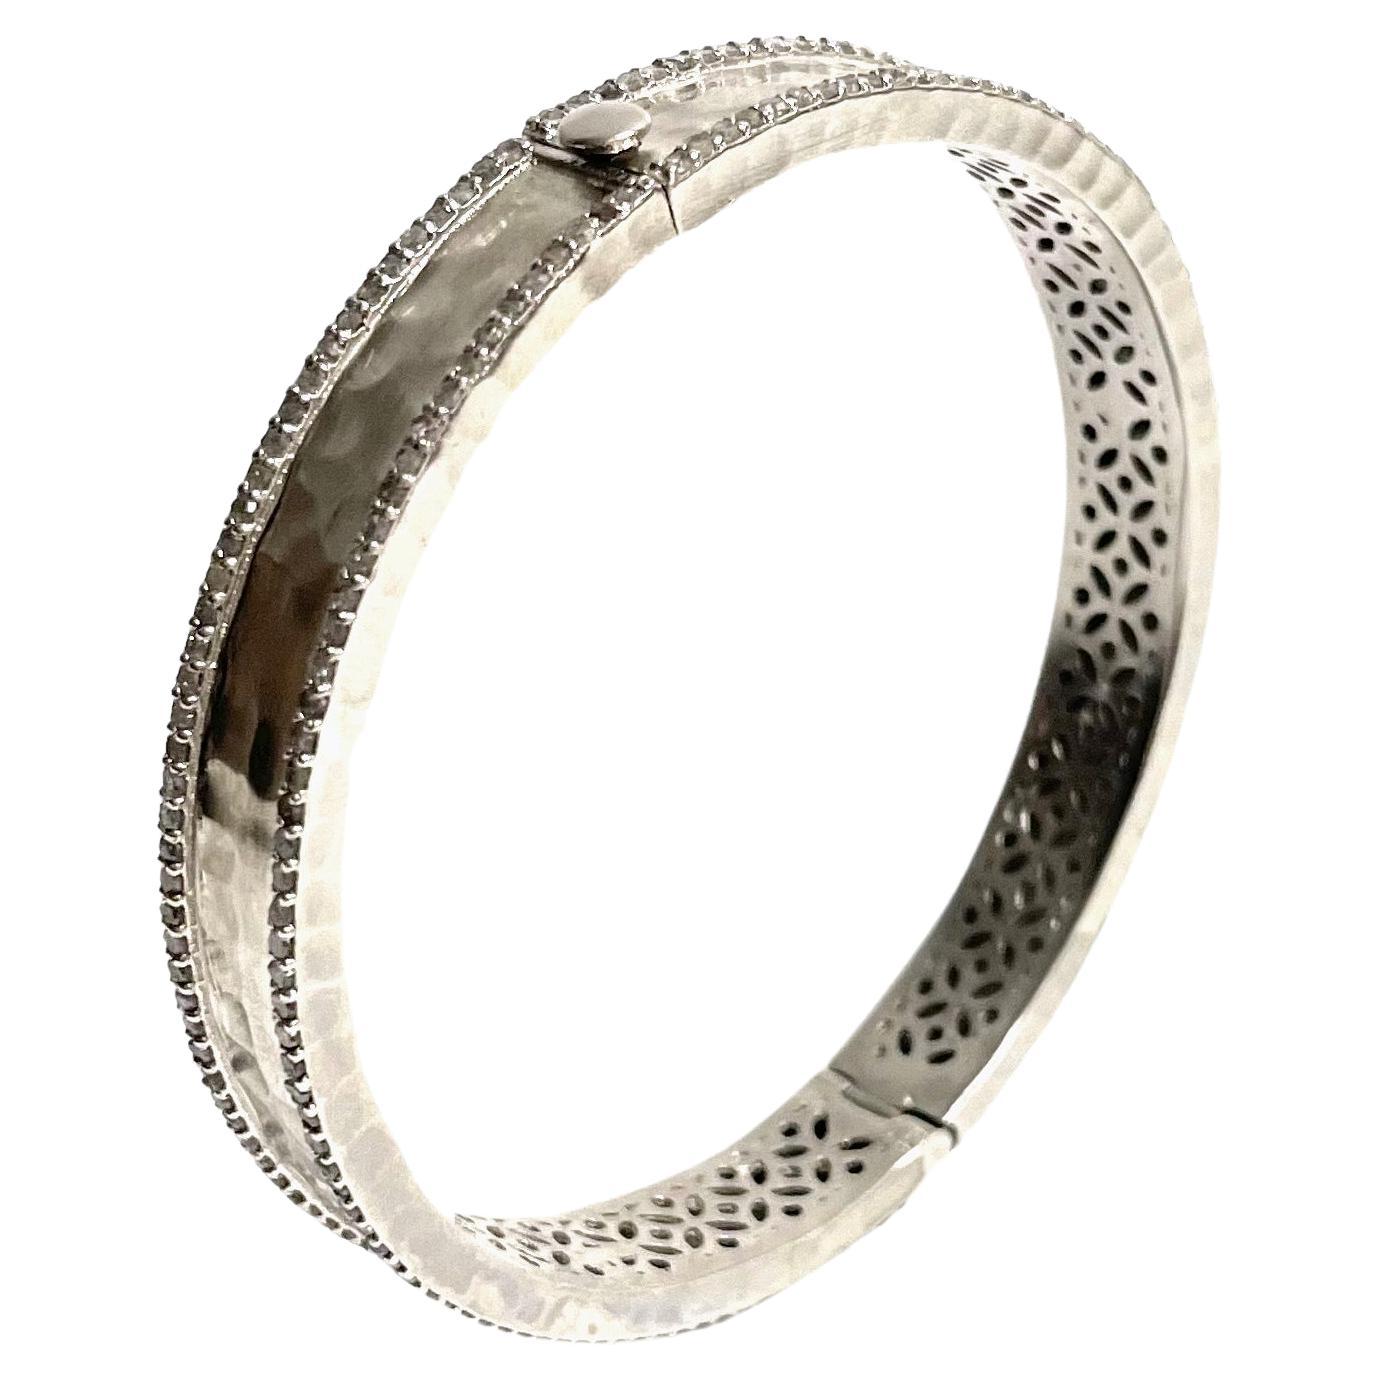  Hammered Rhodium-Plated Silver Bangle with Diamonds Paradizia Bracelet For Sale 9